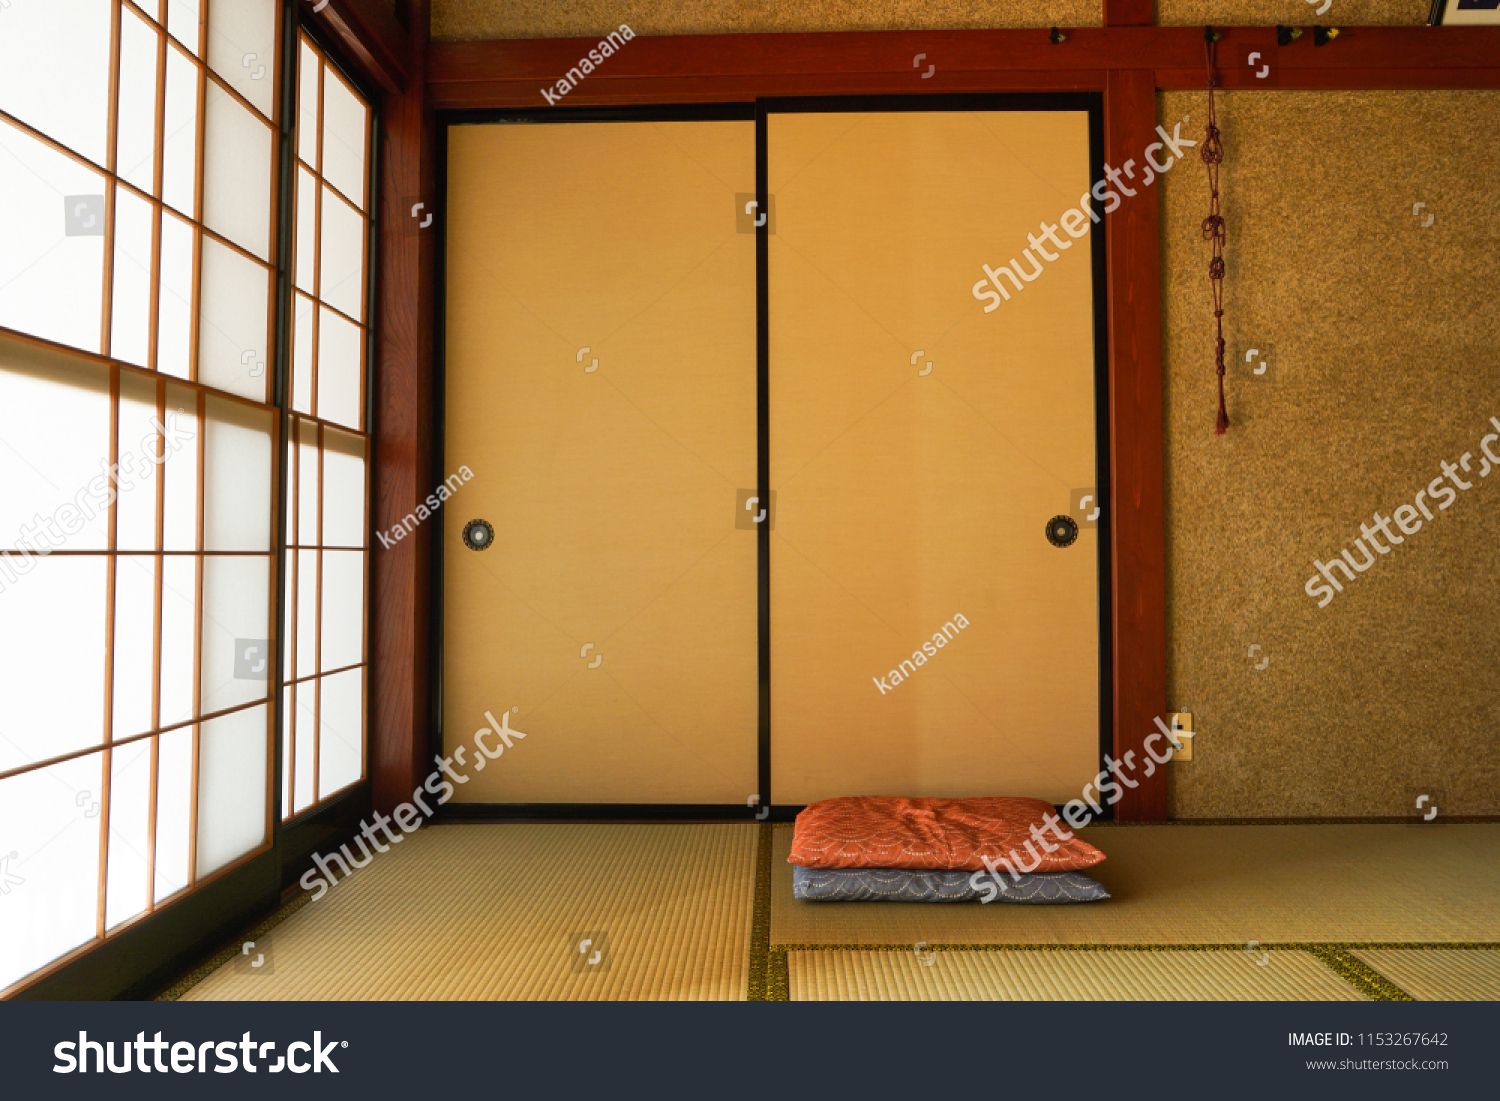 japanese style room                                #1153267642